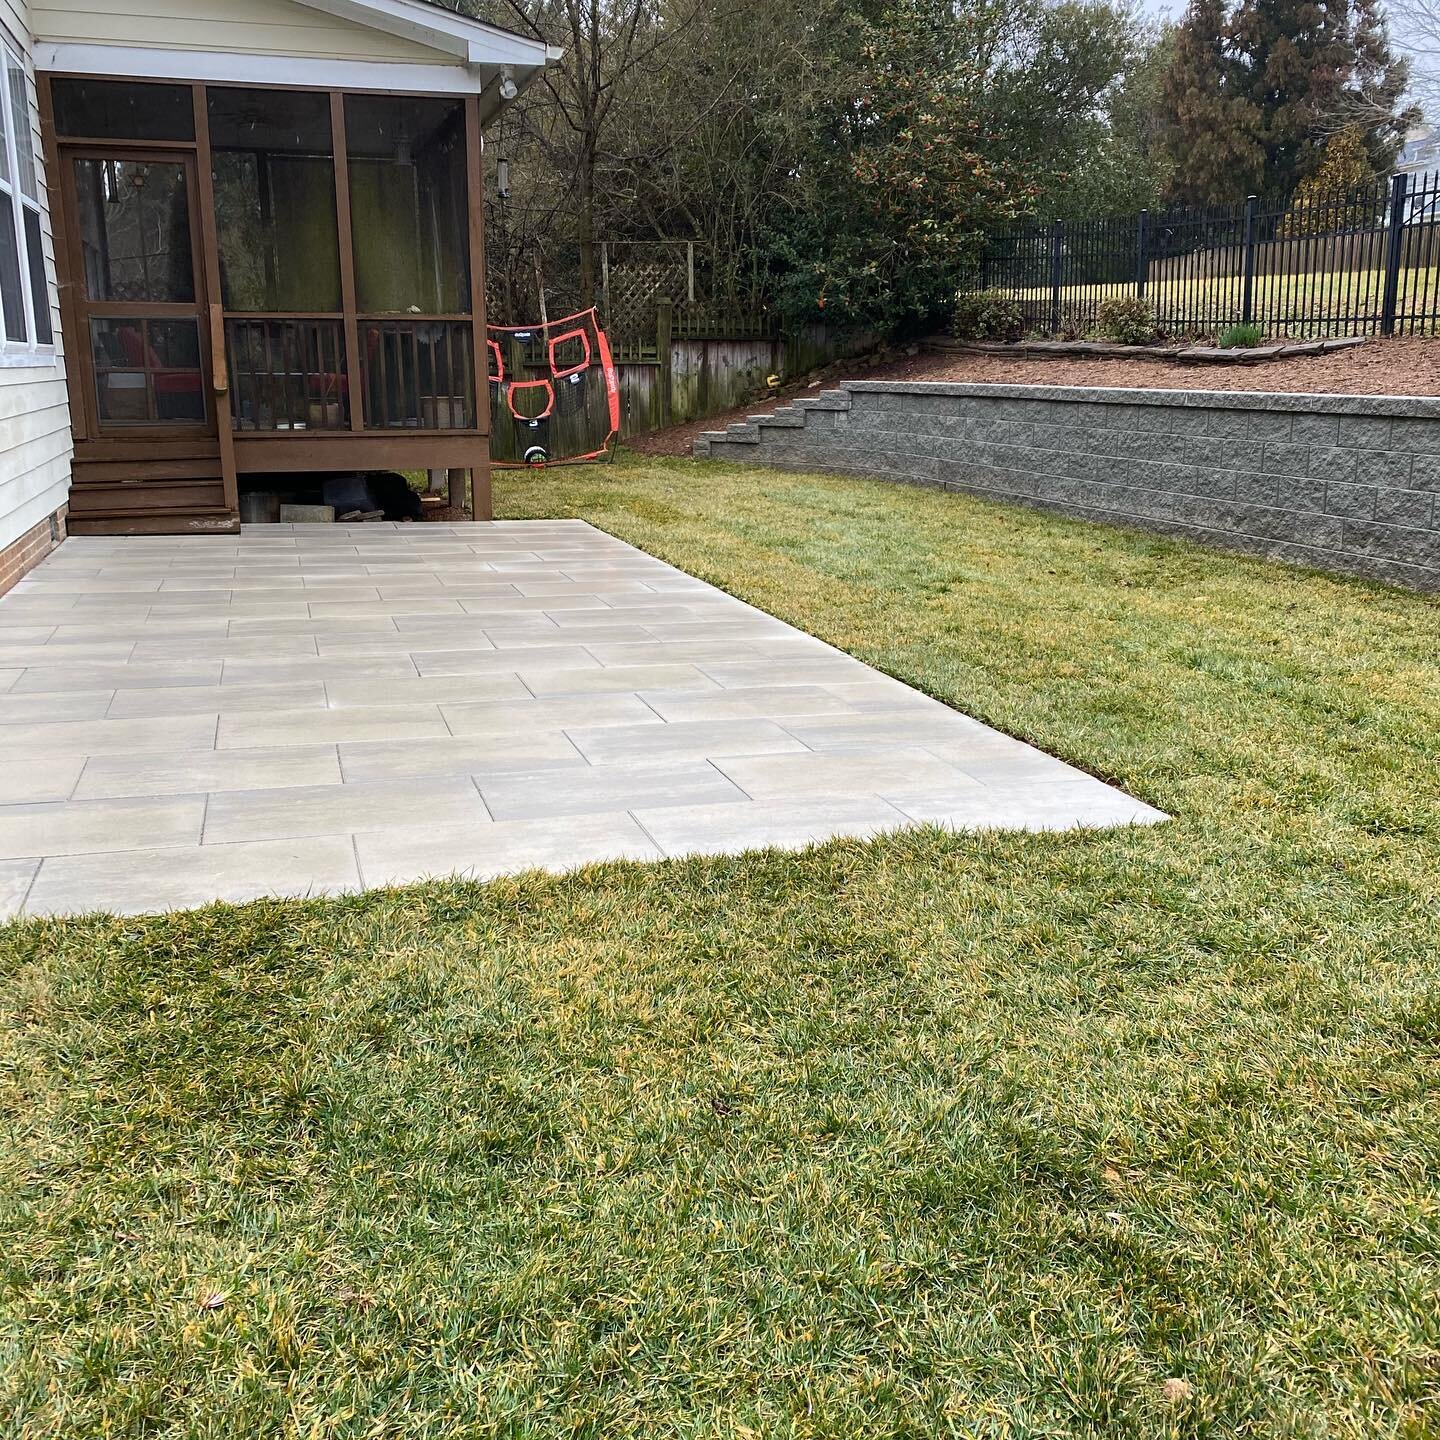 Thankfully we were able to get this project finished prior to all of the rain. The initial purpose of this project was to resolve some drainage issues in the backyard.  We ended up adding the retaining wall across the back of the property to help cre